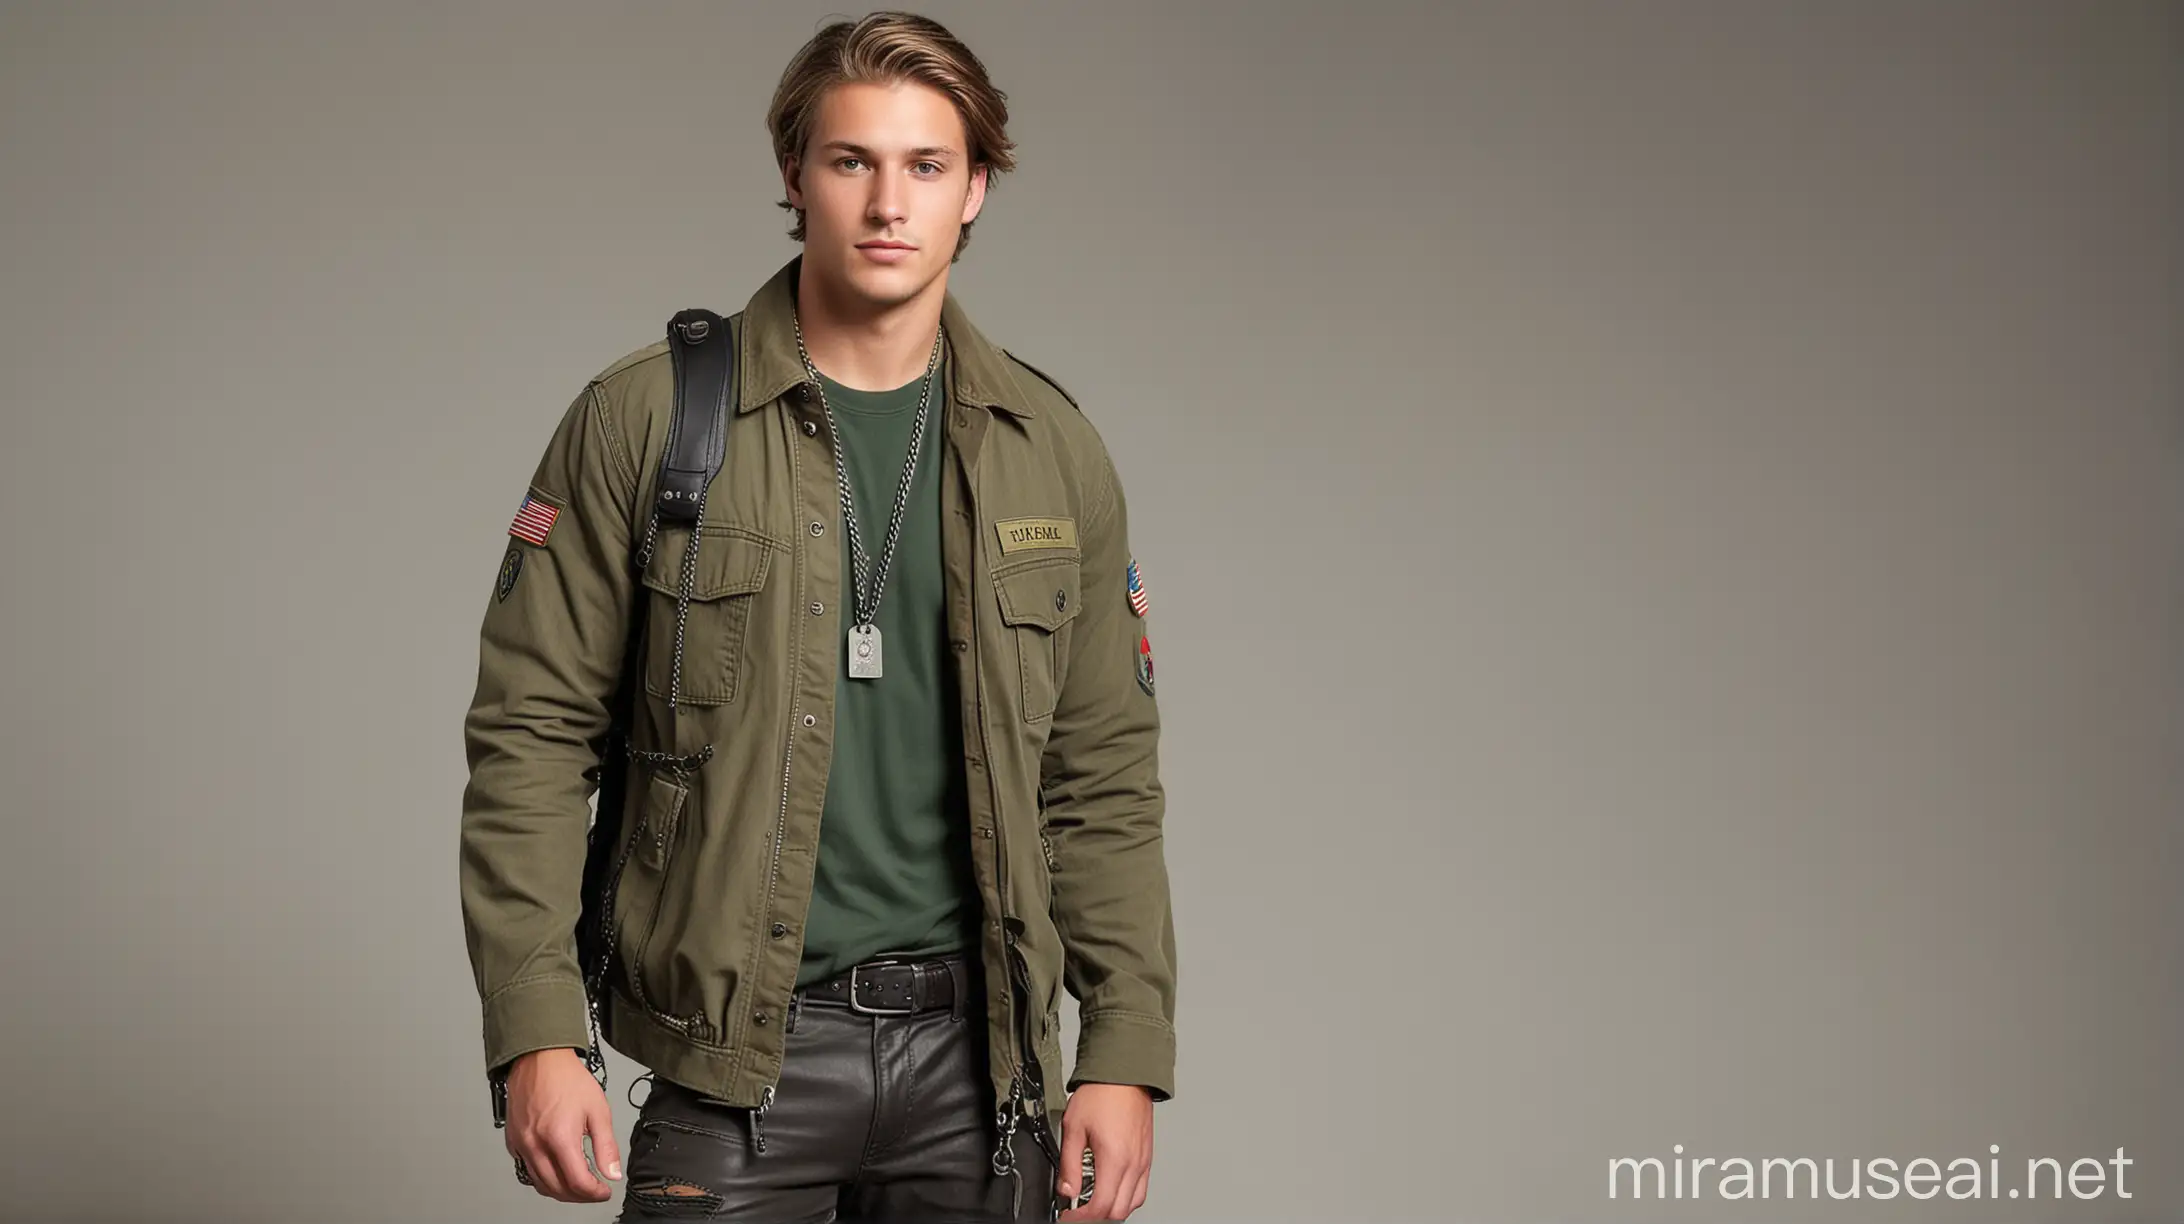 Charismatic Young Man in Khaki Shirt and Military Jacket with Leather Accessories